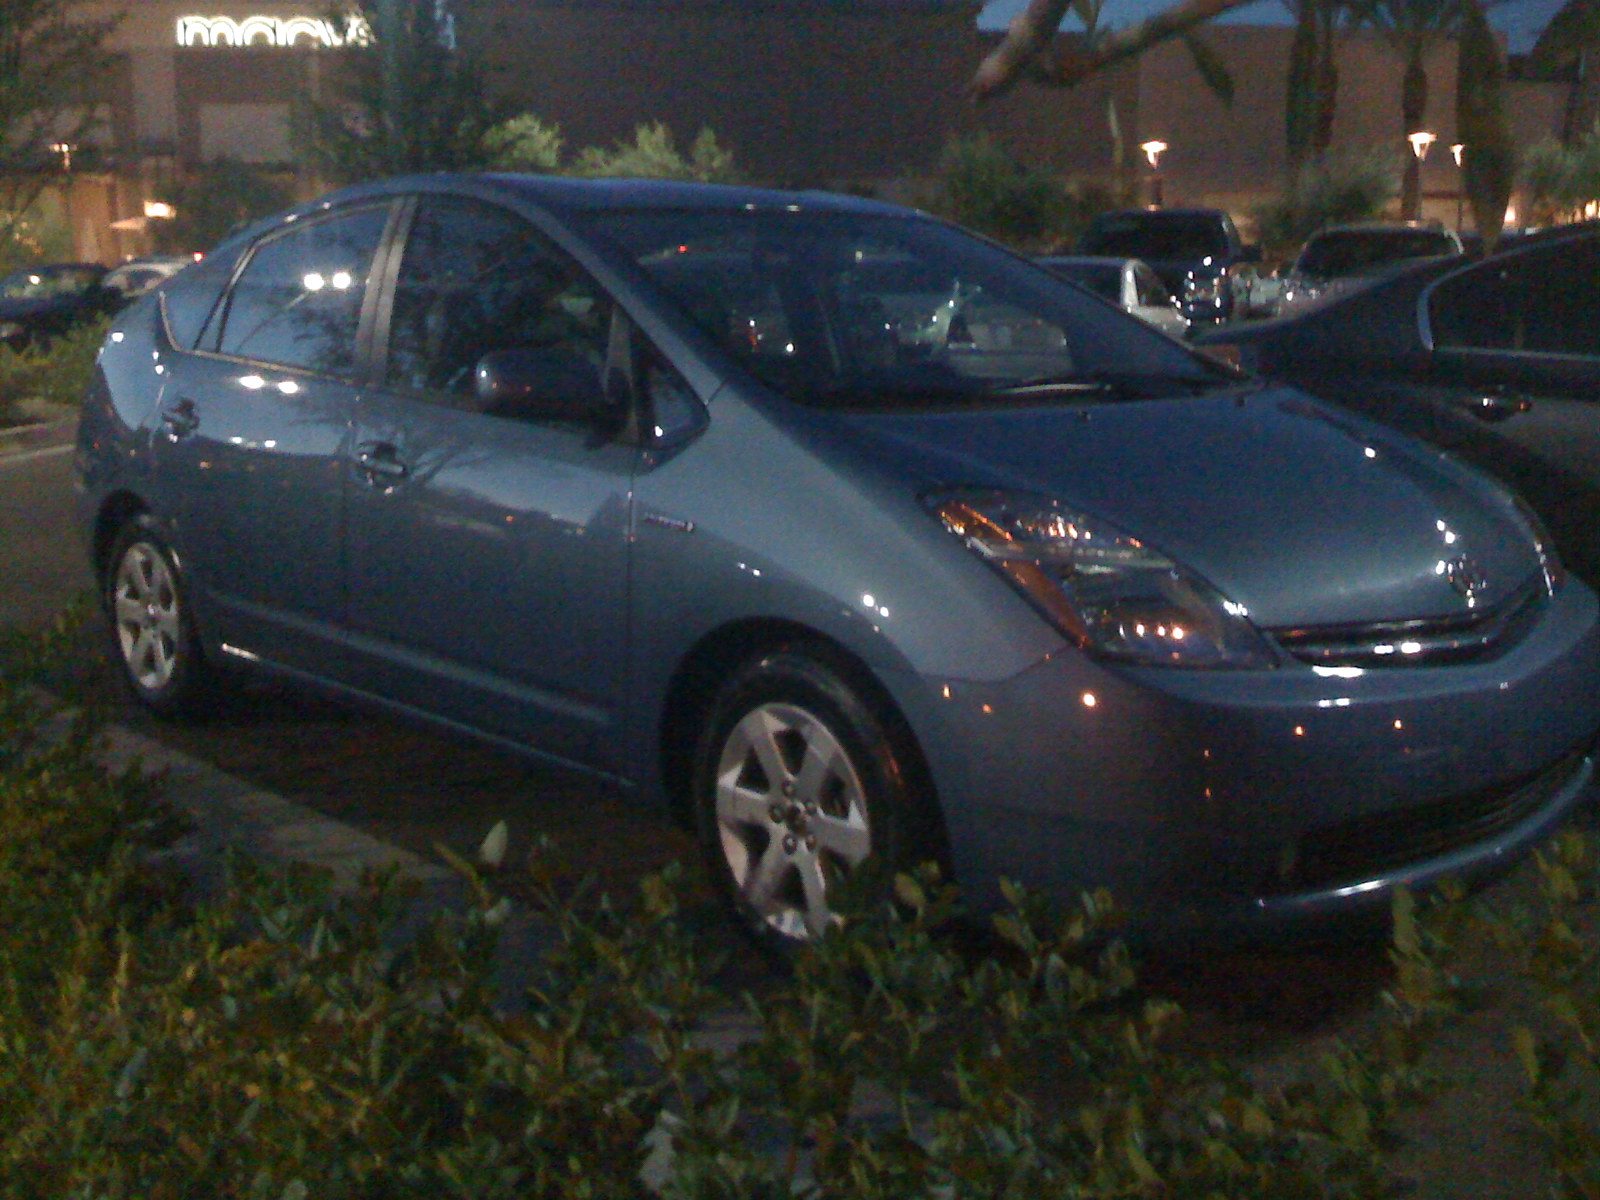 Our new Prius.